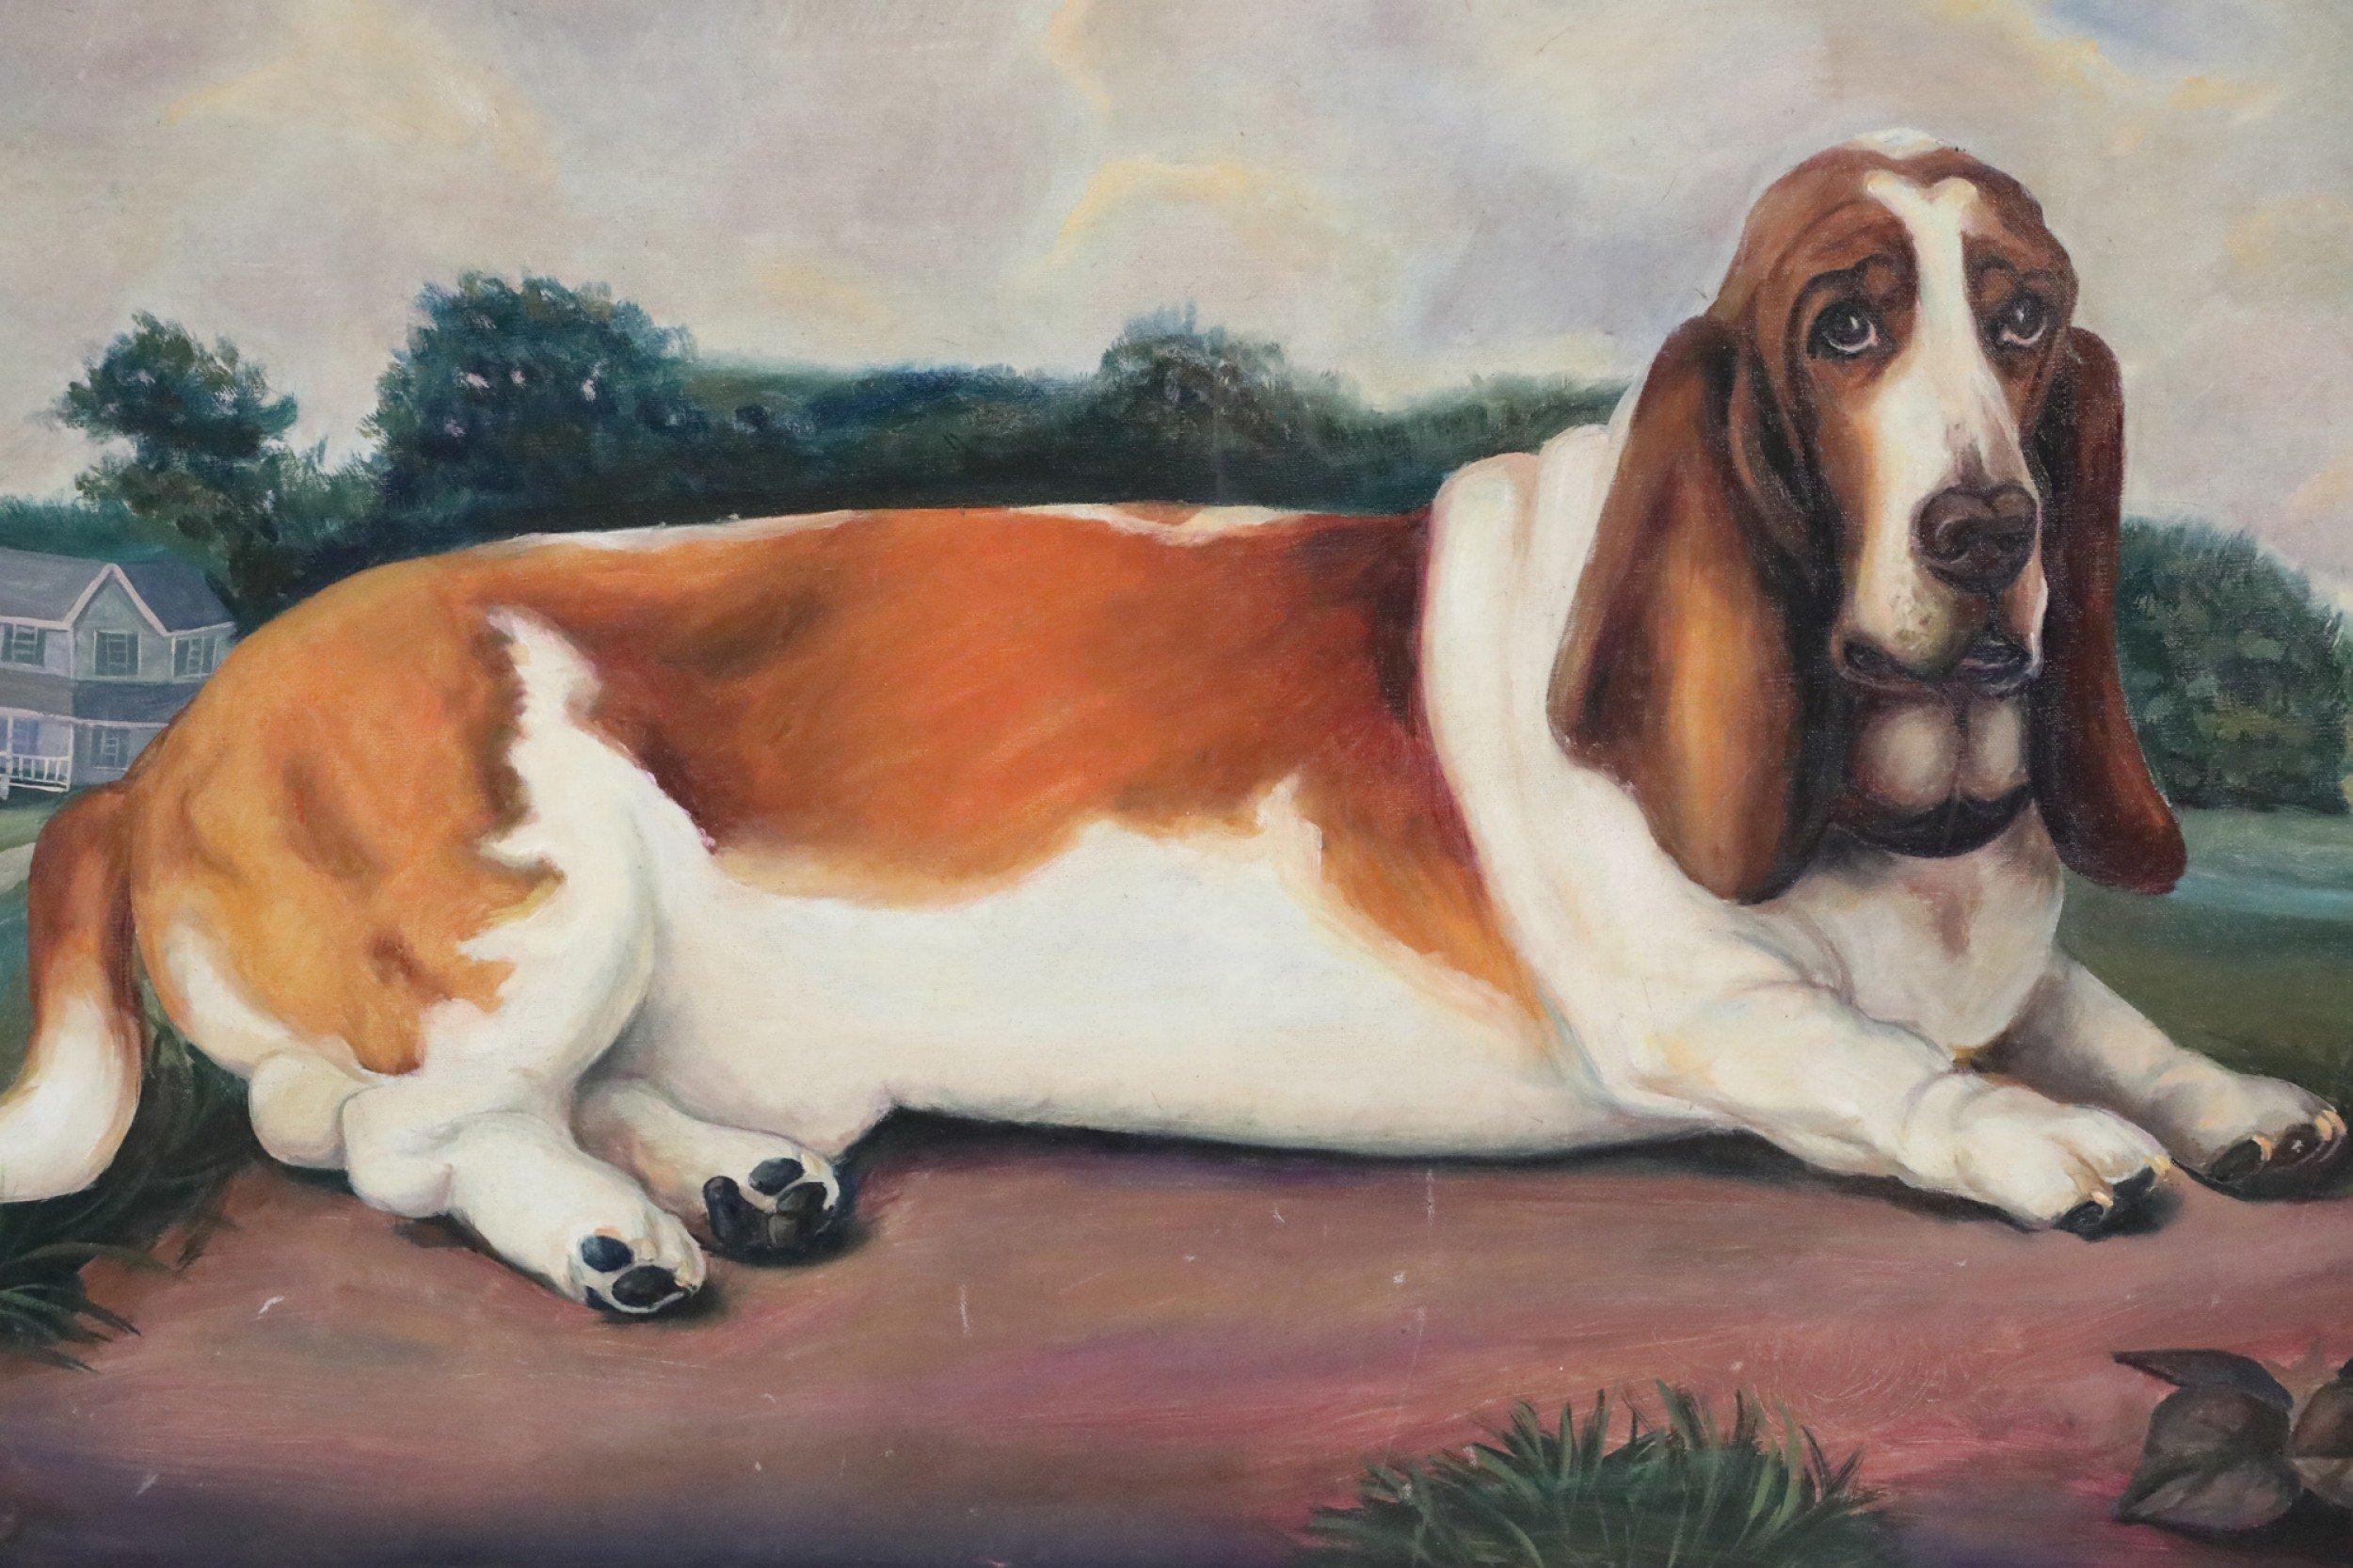 Vintage (20th Century) portrait of a brown and white basset hound captured lying on a path with a house and landscape scenery in the distance, on a large, rectangular unframed canvas.